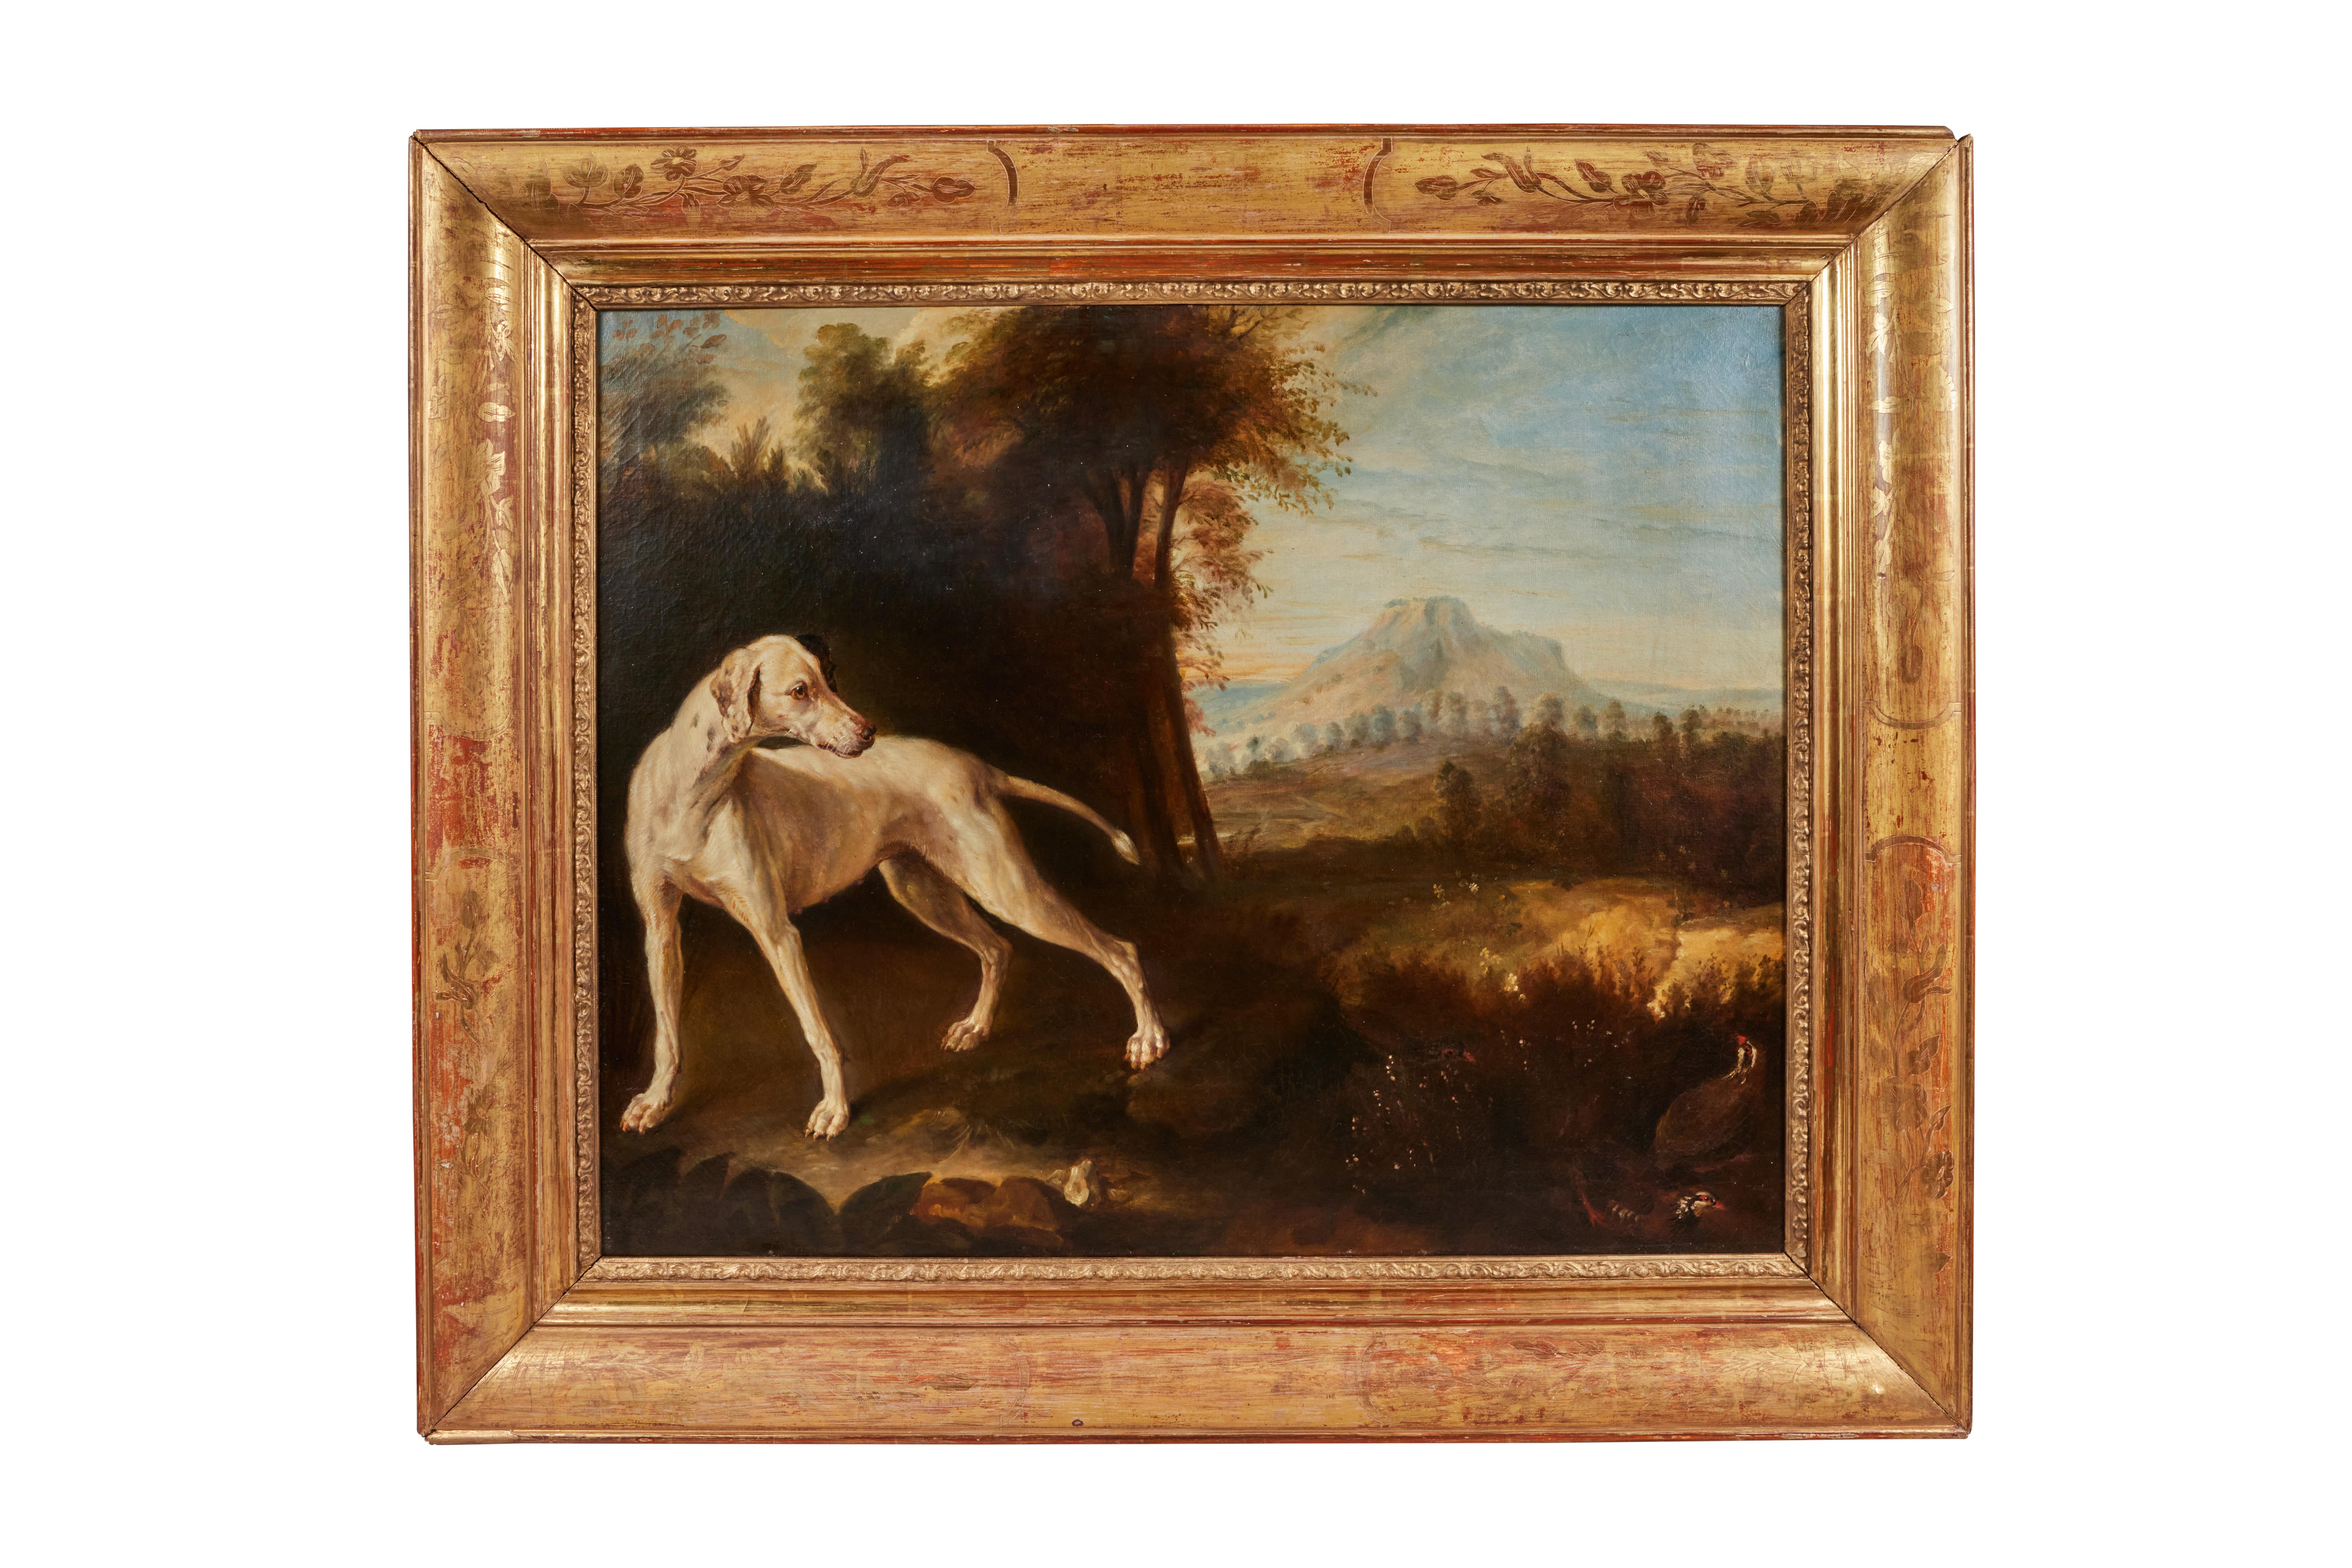 Absolutely sensational c. 1820, English, oil-on-canvas painting of a hound in a bucolic landscape amidst birds and rich vegetation. Exceptional expression. Held in a hand-carved, foliate embellished, period, giltwood frame.